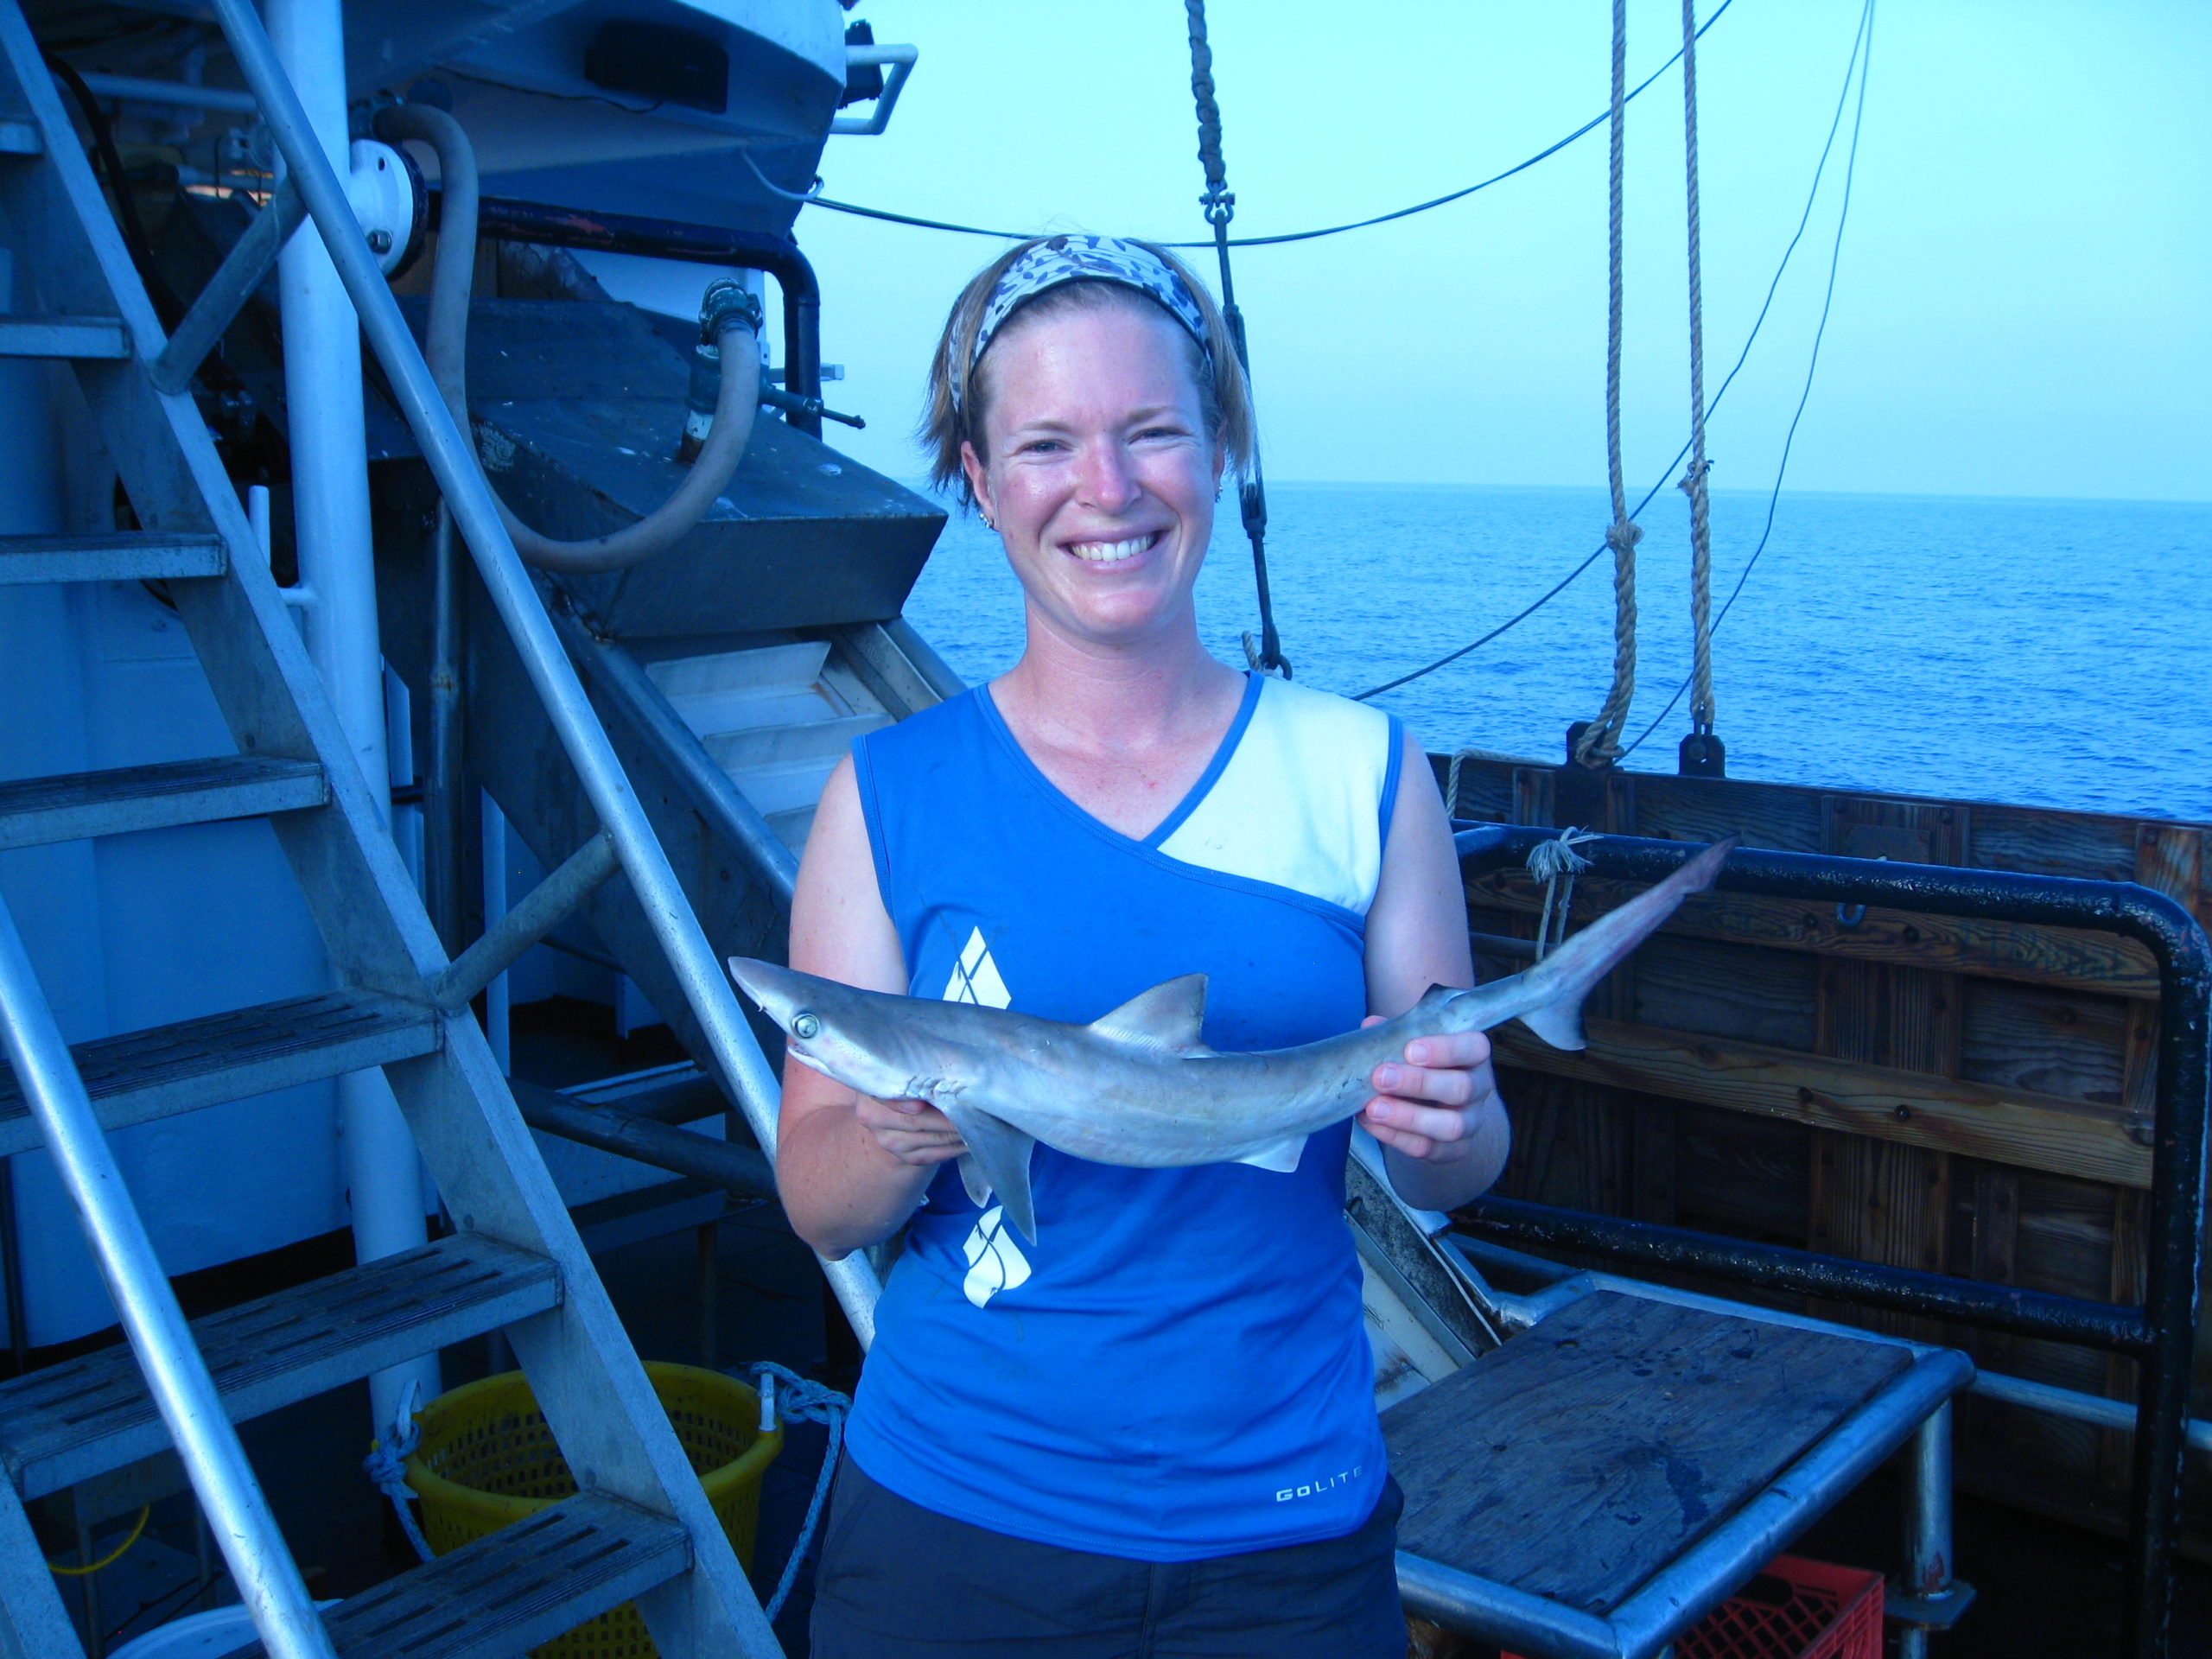 A woman on a ship holding a shark with water in the background.